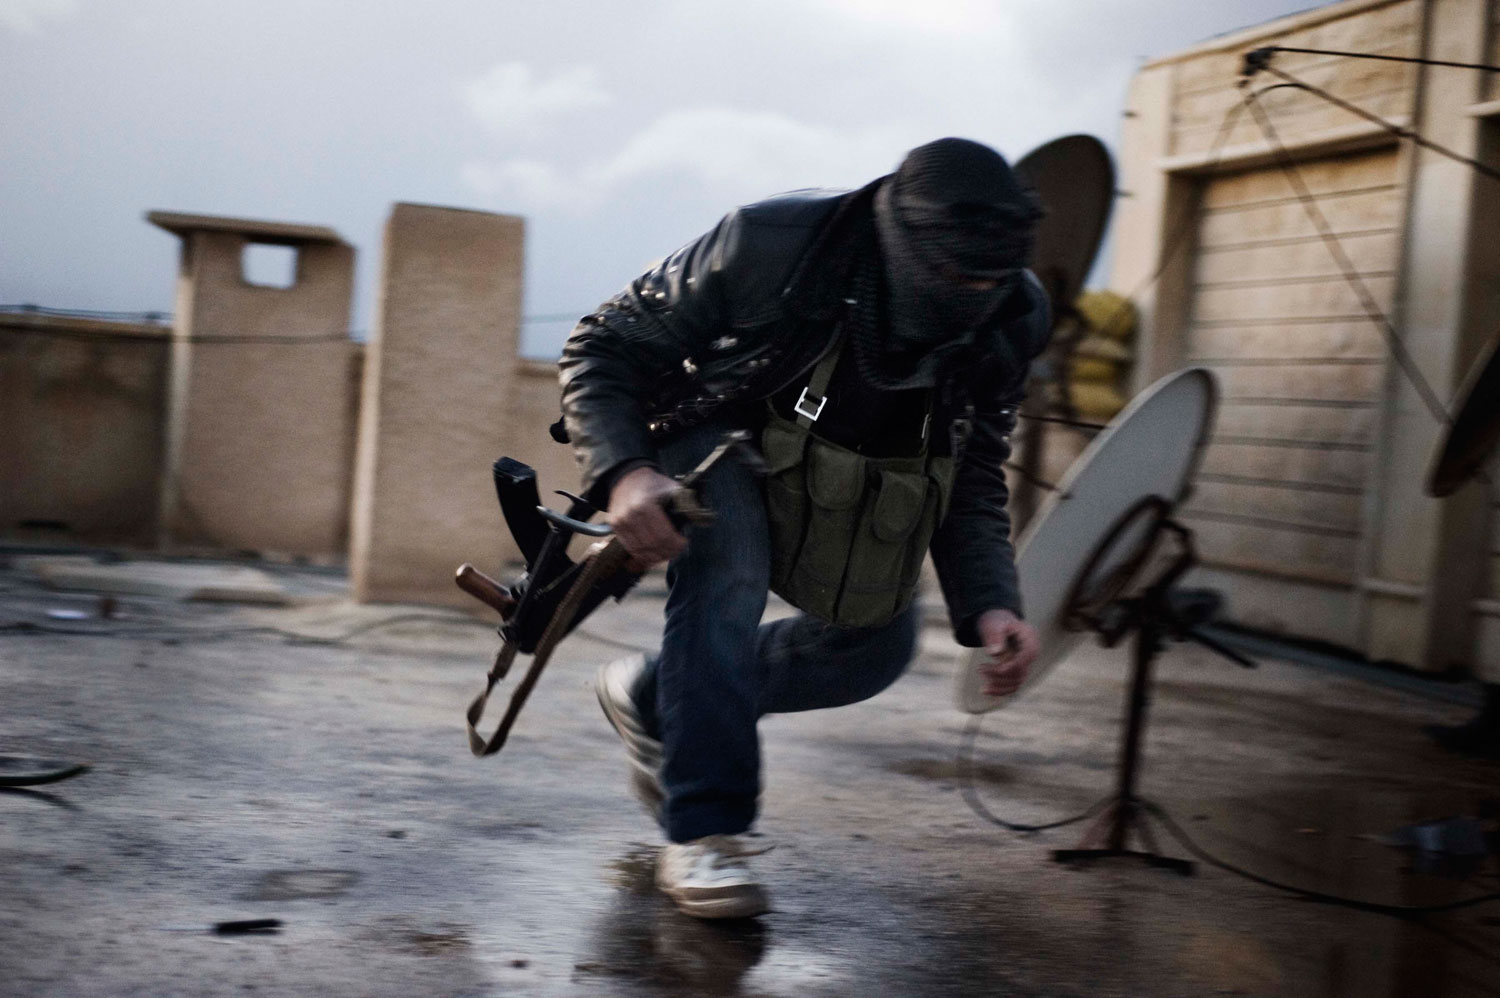 Feb. 10, 2012. A member of the Free Syrian Army takes cover from Syrian Army snipers on the roof of the former police station in al-Qsair.